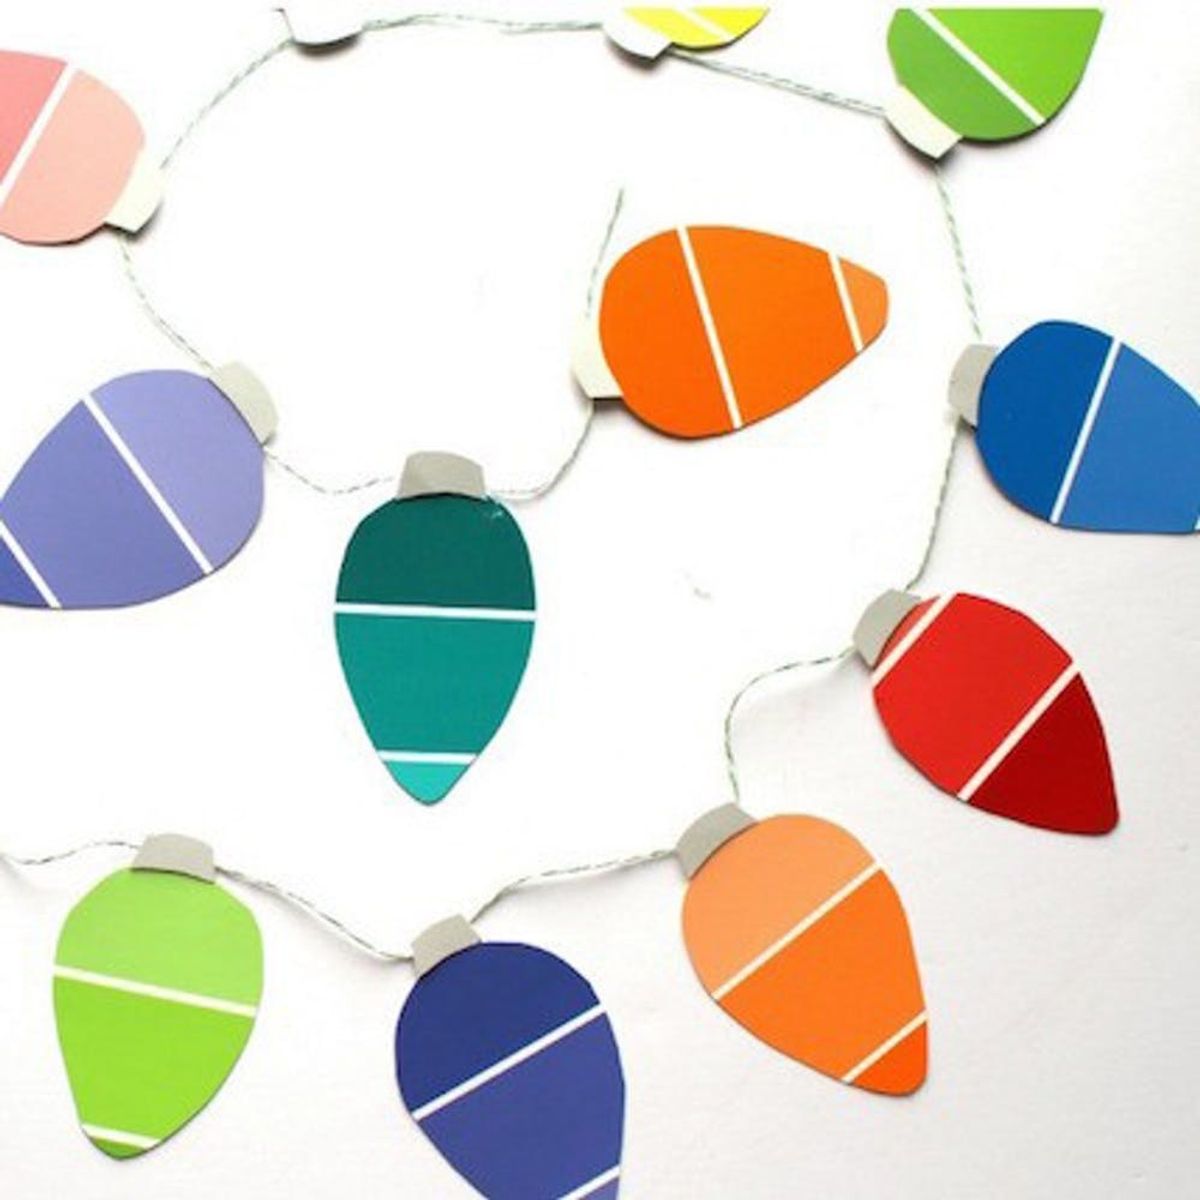 22 Festive Holiday Crafts to Make With Your Kids